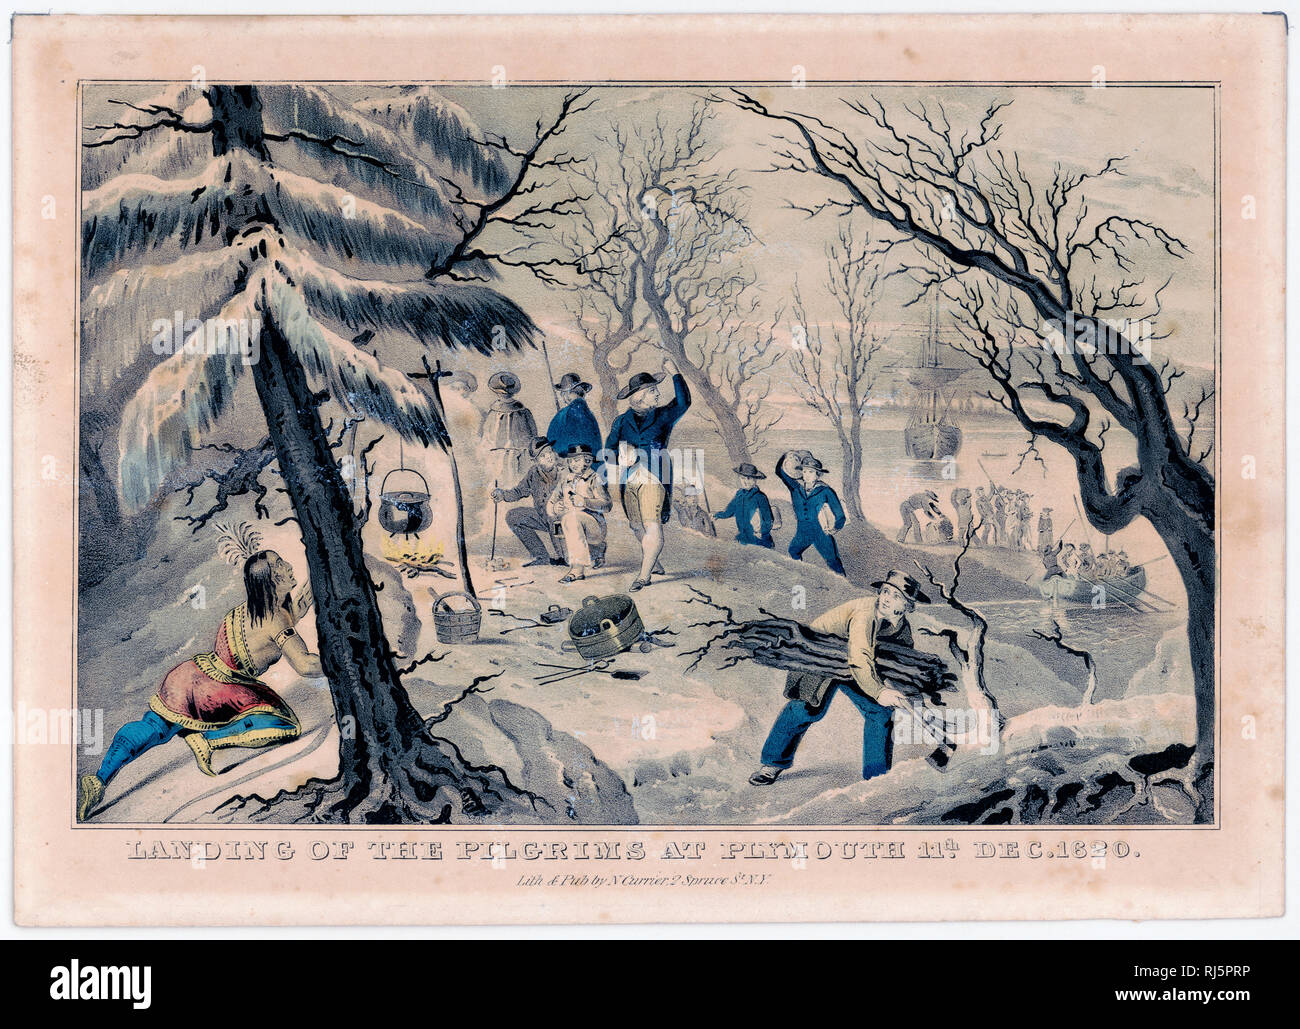 Print shows a Native man, hiding on the left, watching the Pilgrims around a campfire with small cauldron; a man with hatchet is gathering firewood and more Pilgrims are coming ashore from the Mayflower, in a winter scene with snow-covered landscape. Stock Photo